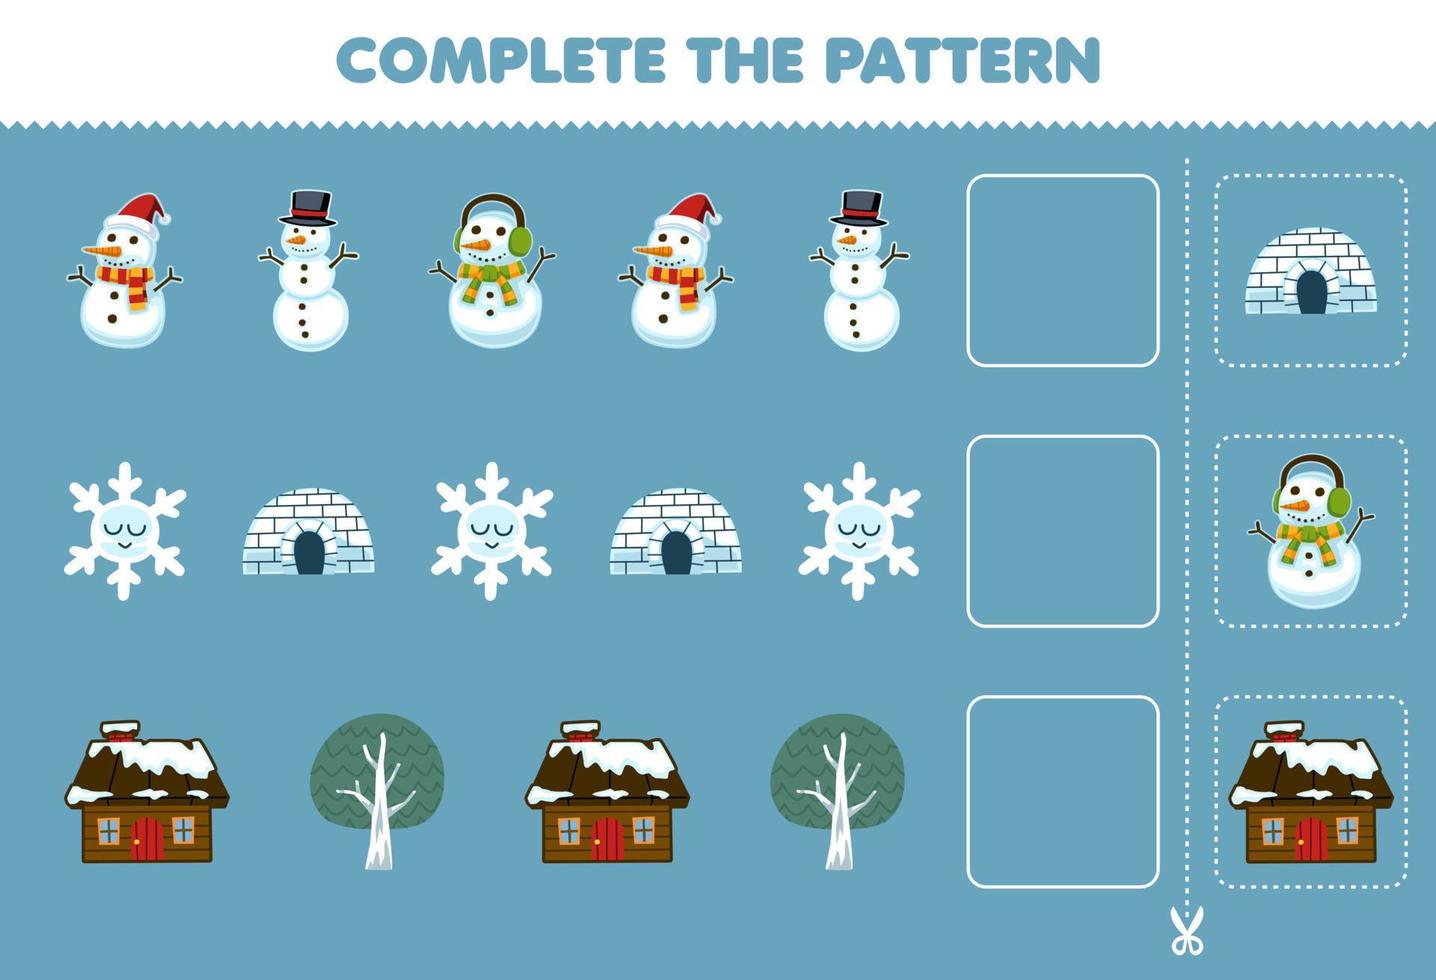 Education game for children cut and complete the pattern of each row from a cute cartoon snowman snowflake igloo house tree vector